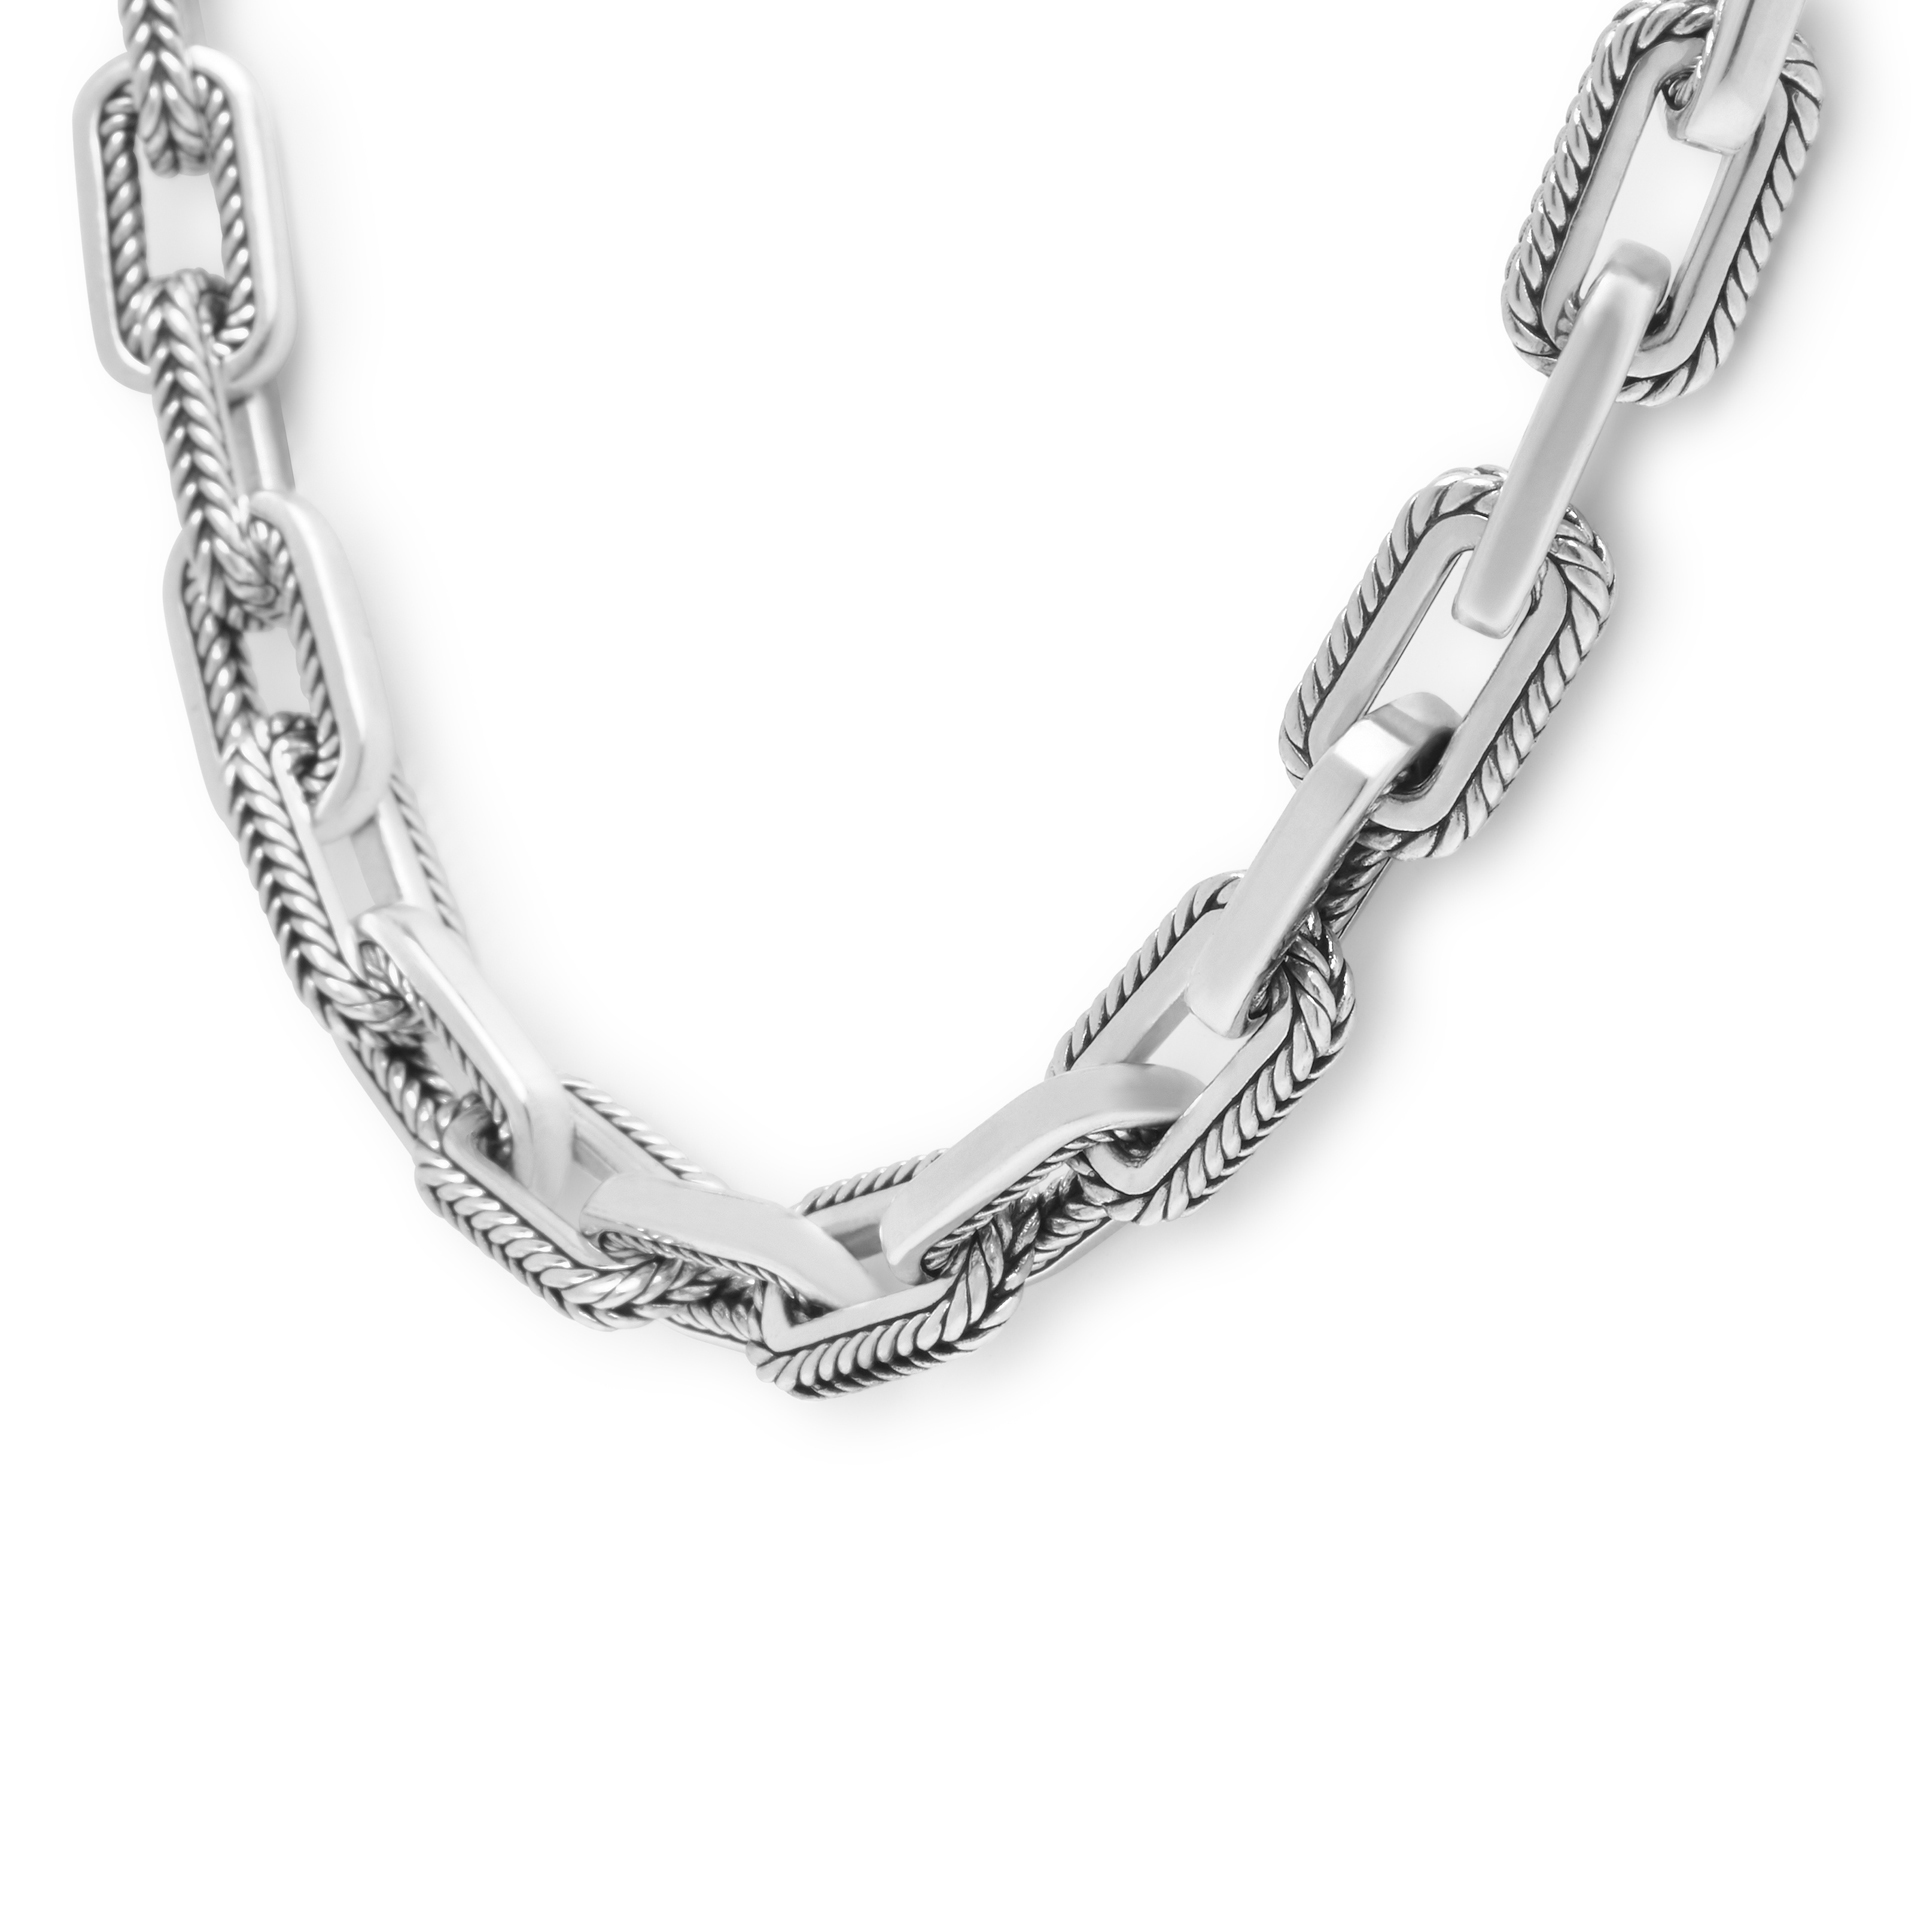 barbara_link_xs_necklace_silver_front_detail